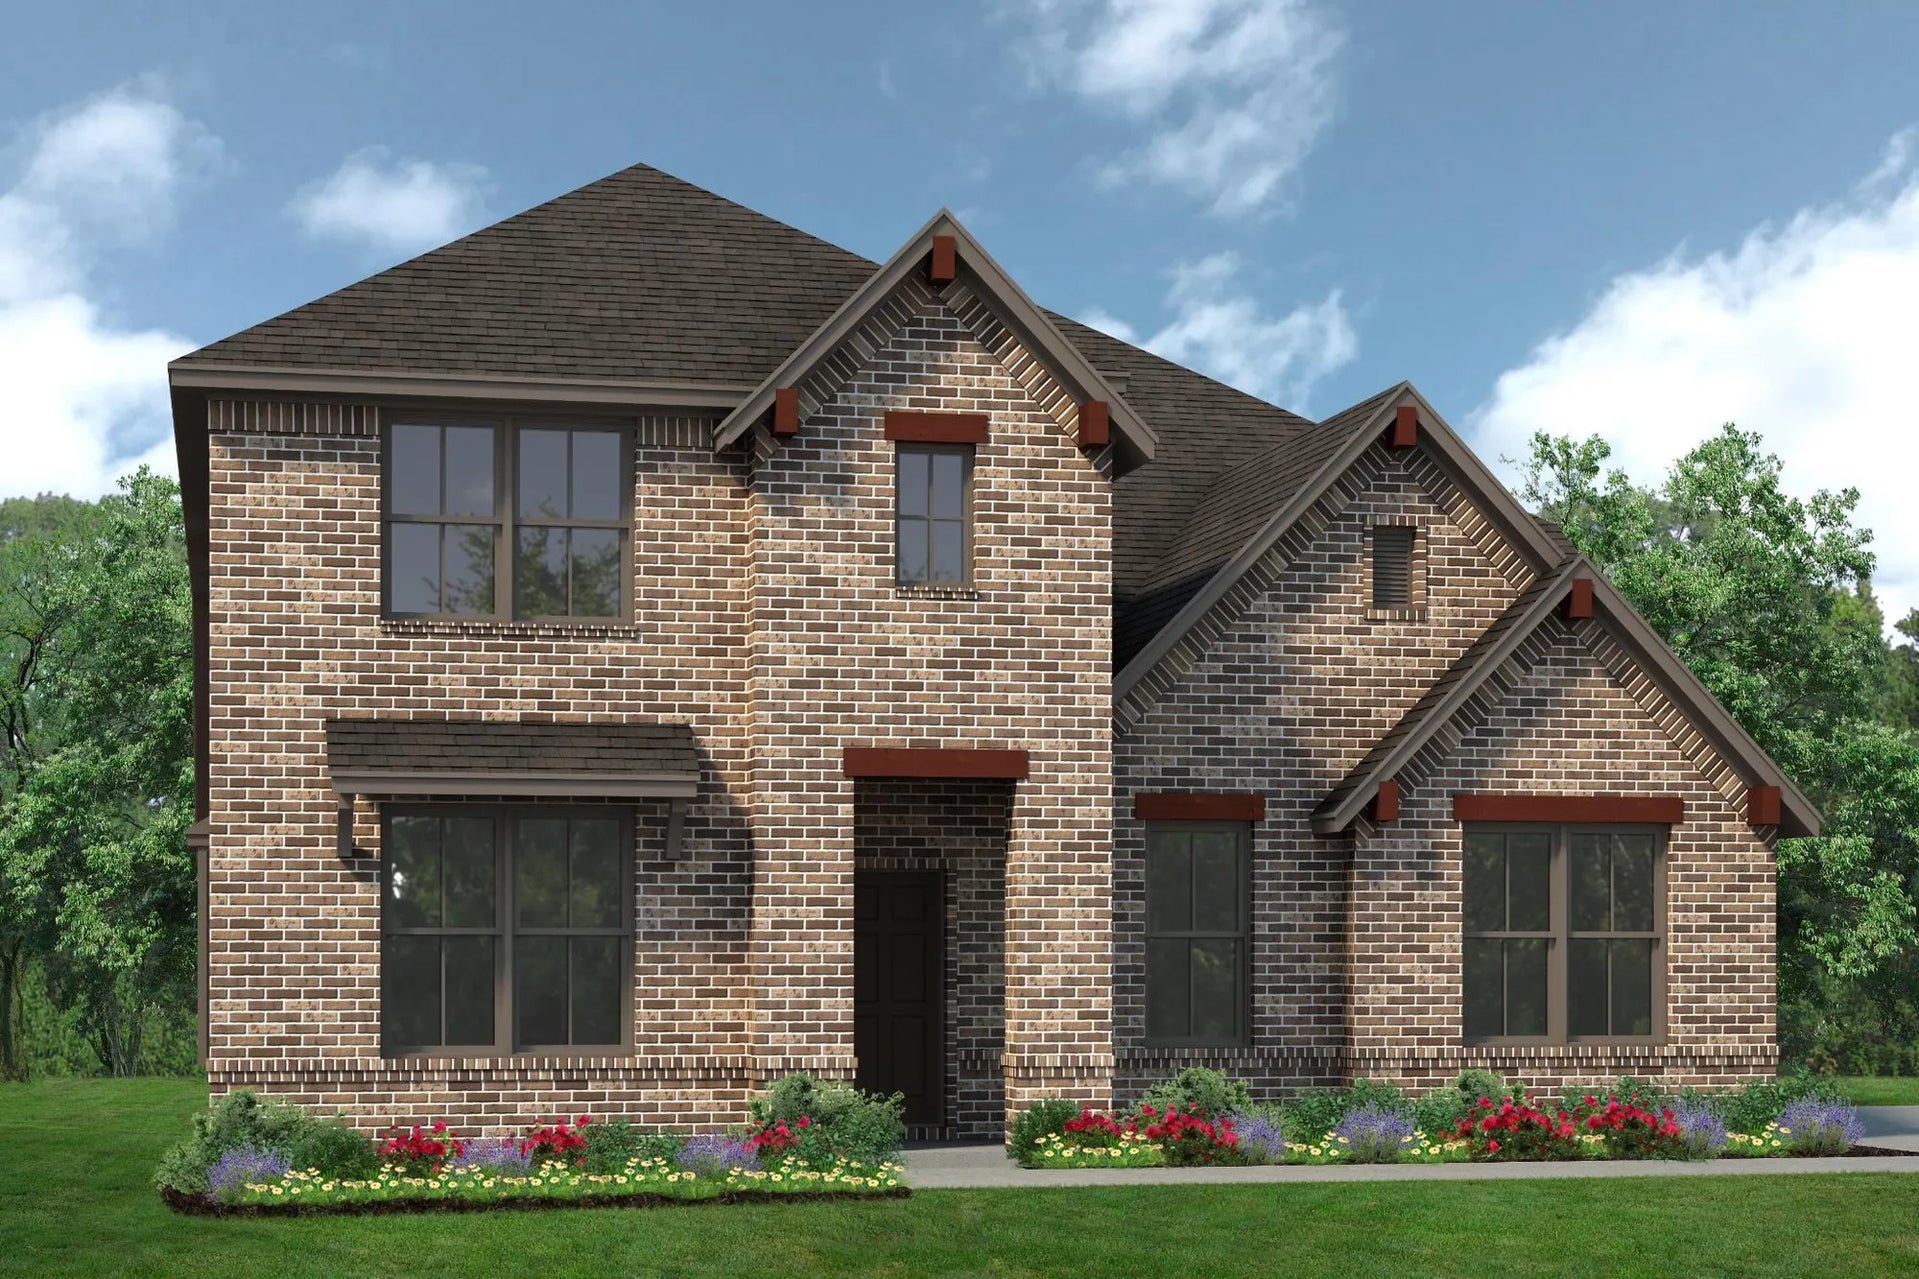 2870 B with Outswing. Concept 2870 Home with 4 Bedrooms